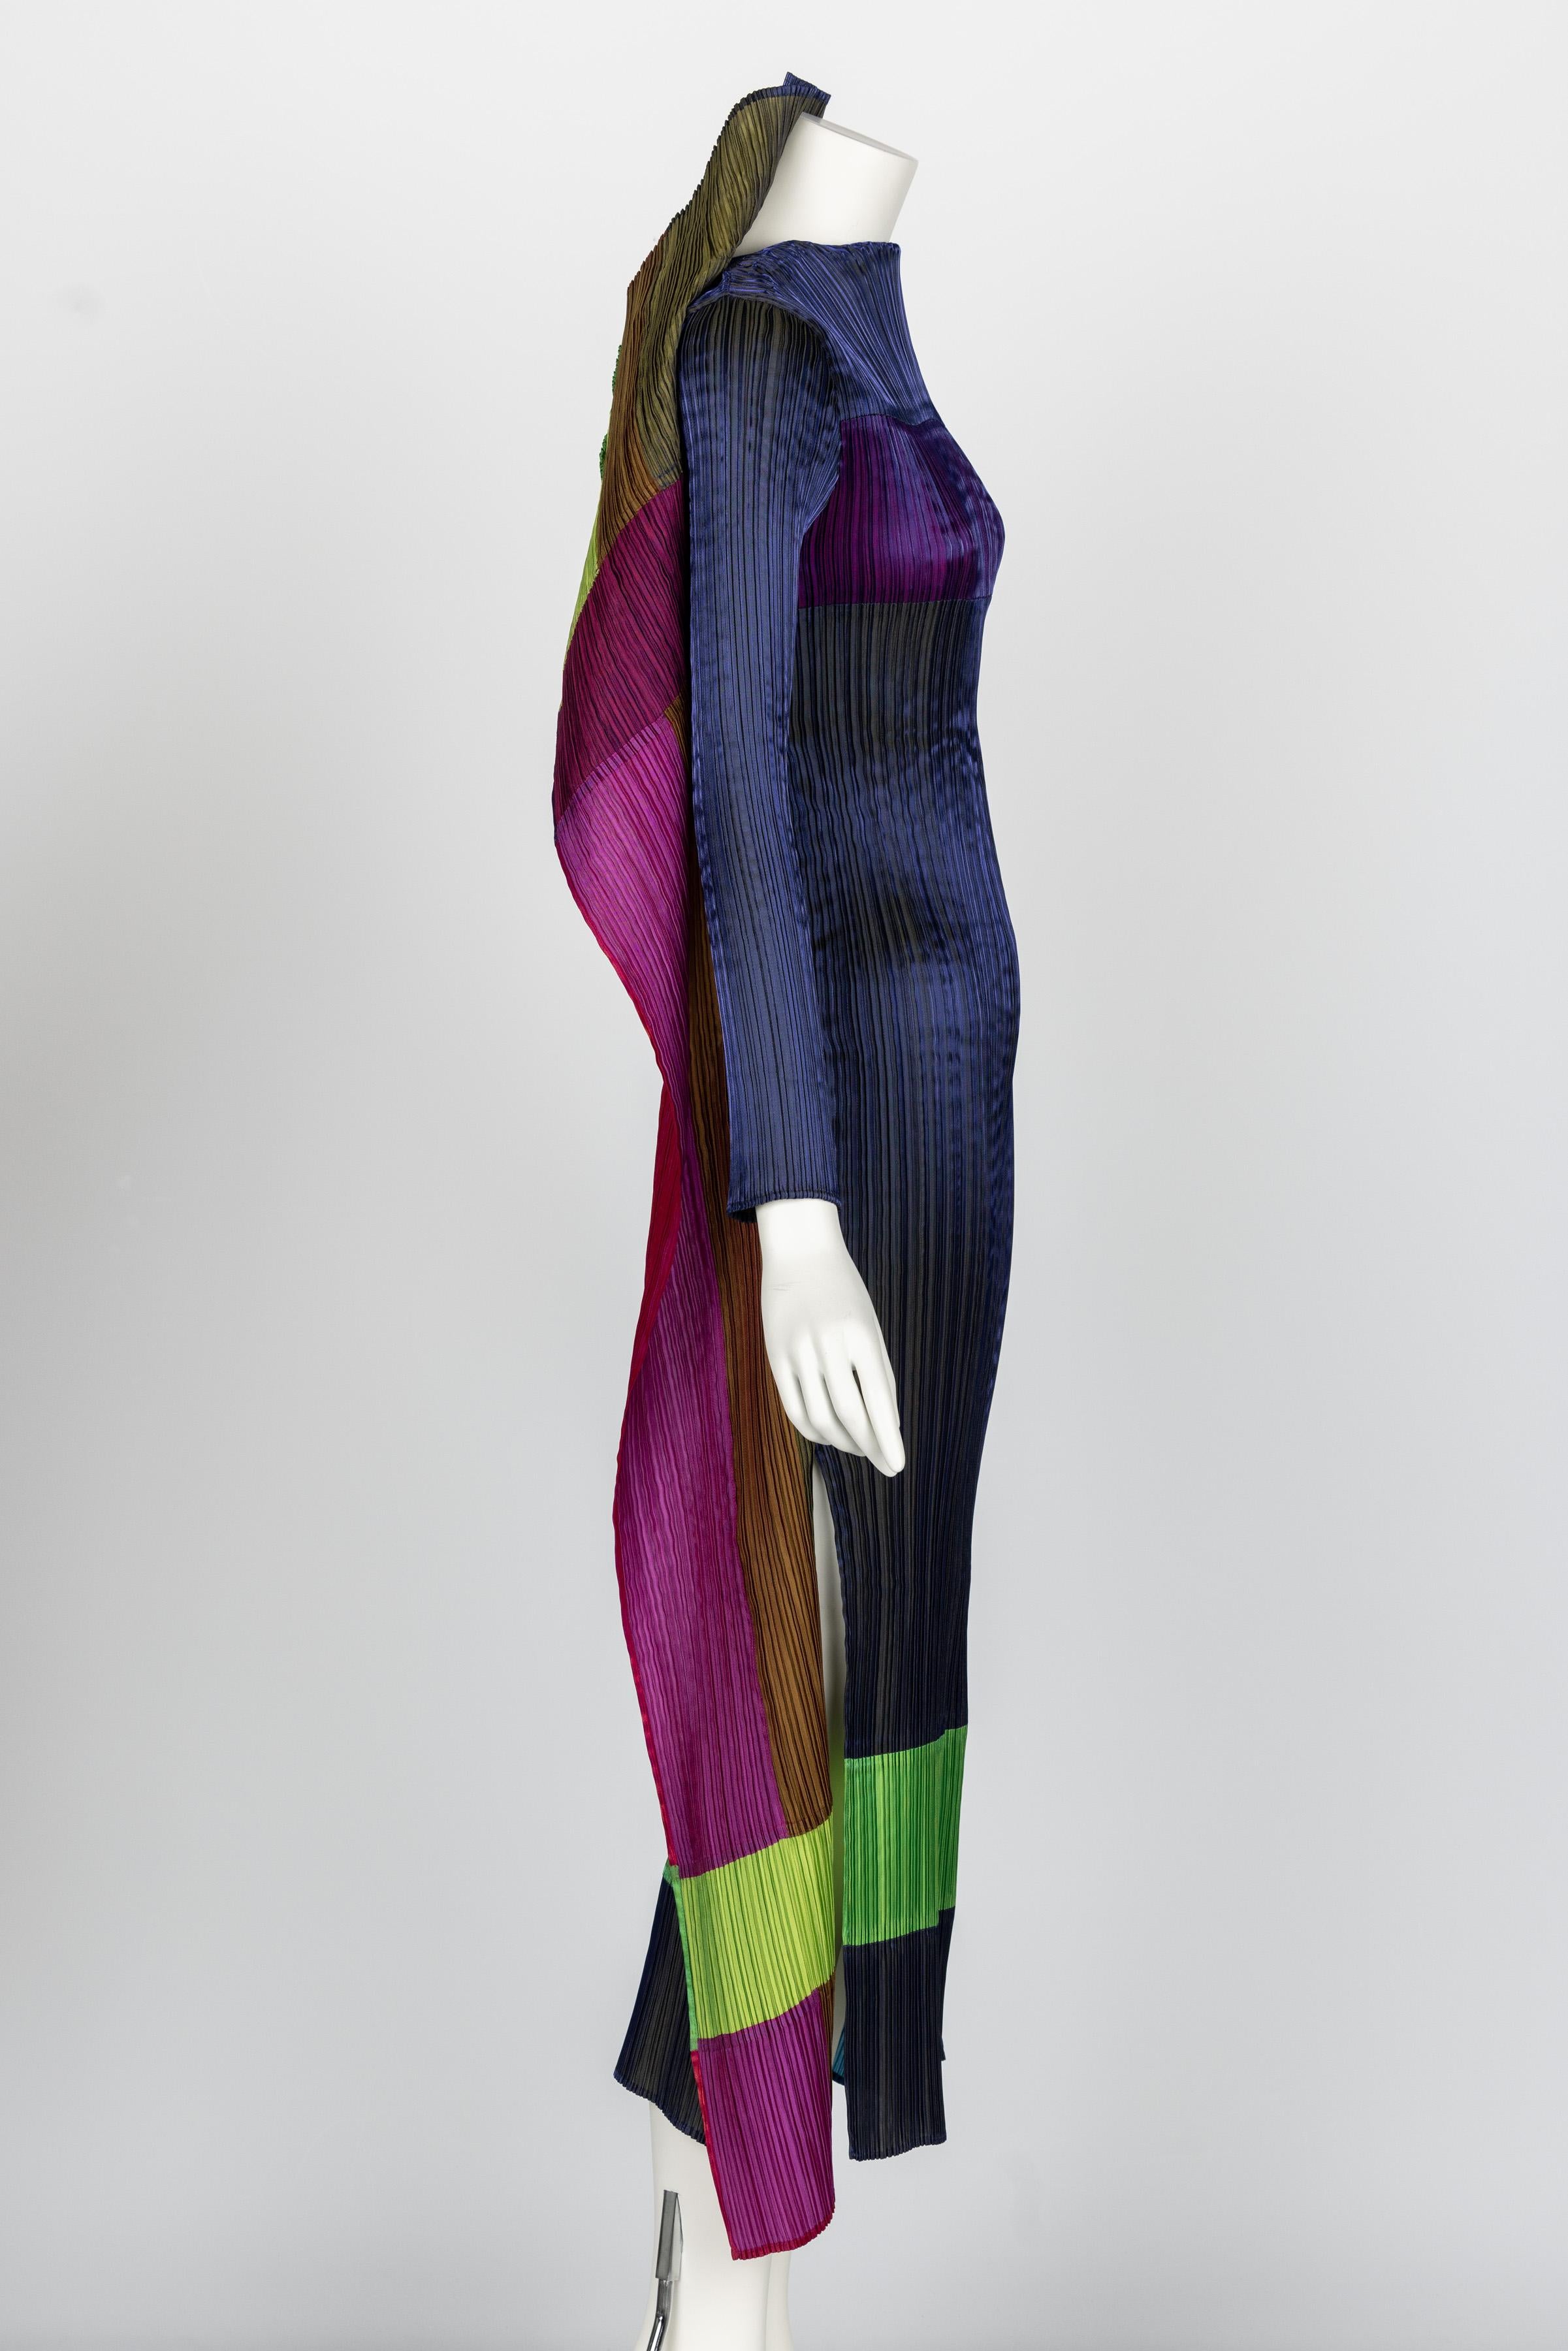 Incredible Rare Issey Miyake Pleats Please Avant Garde Color Block Dress For Sale 1